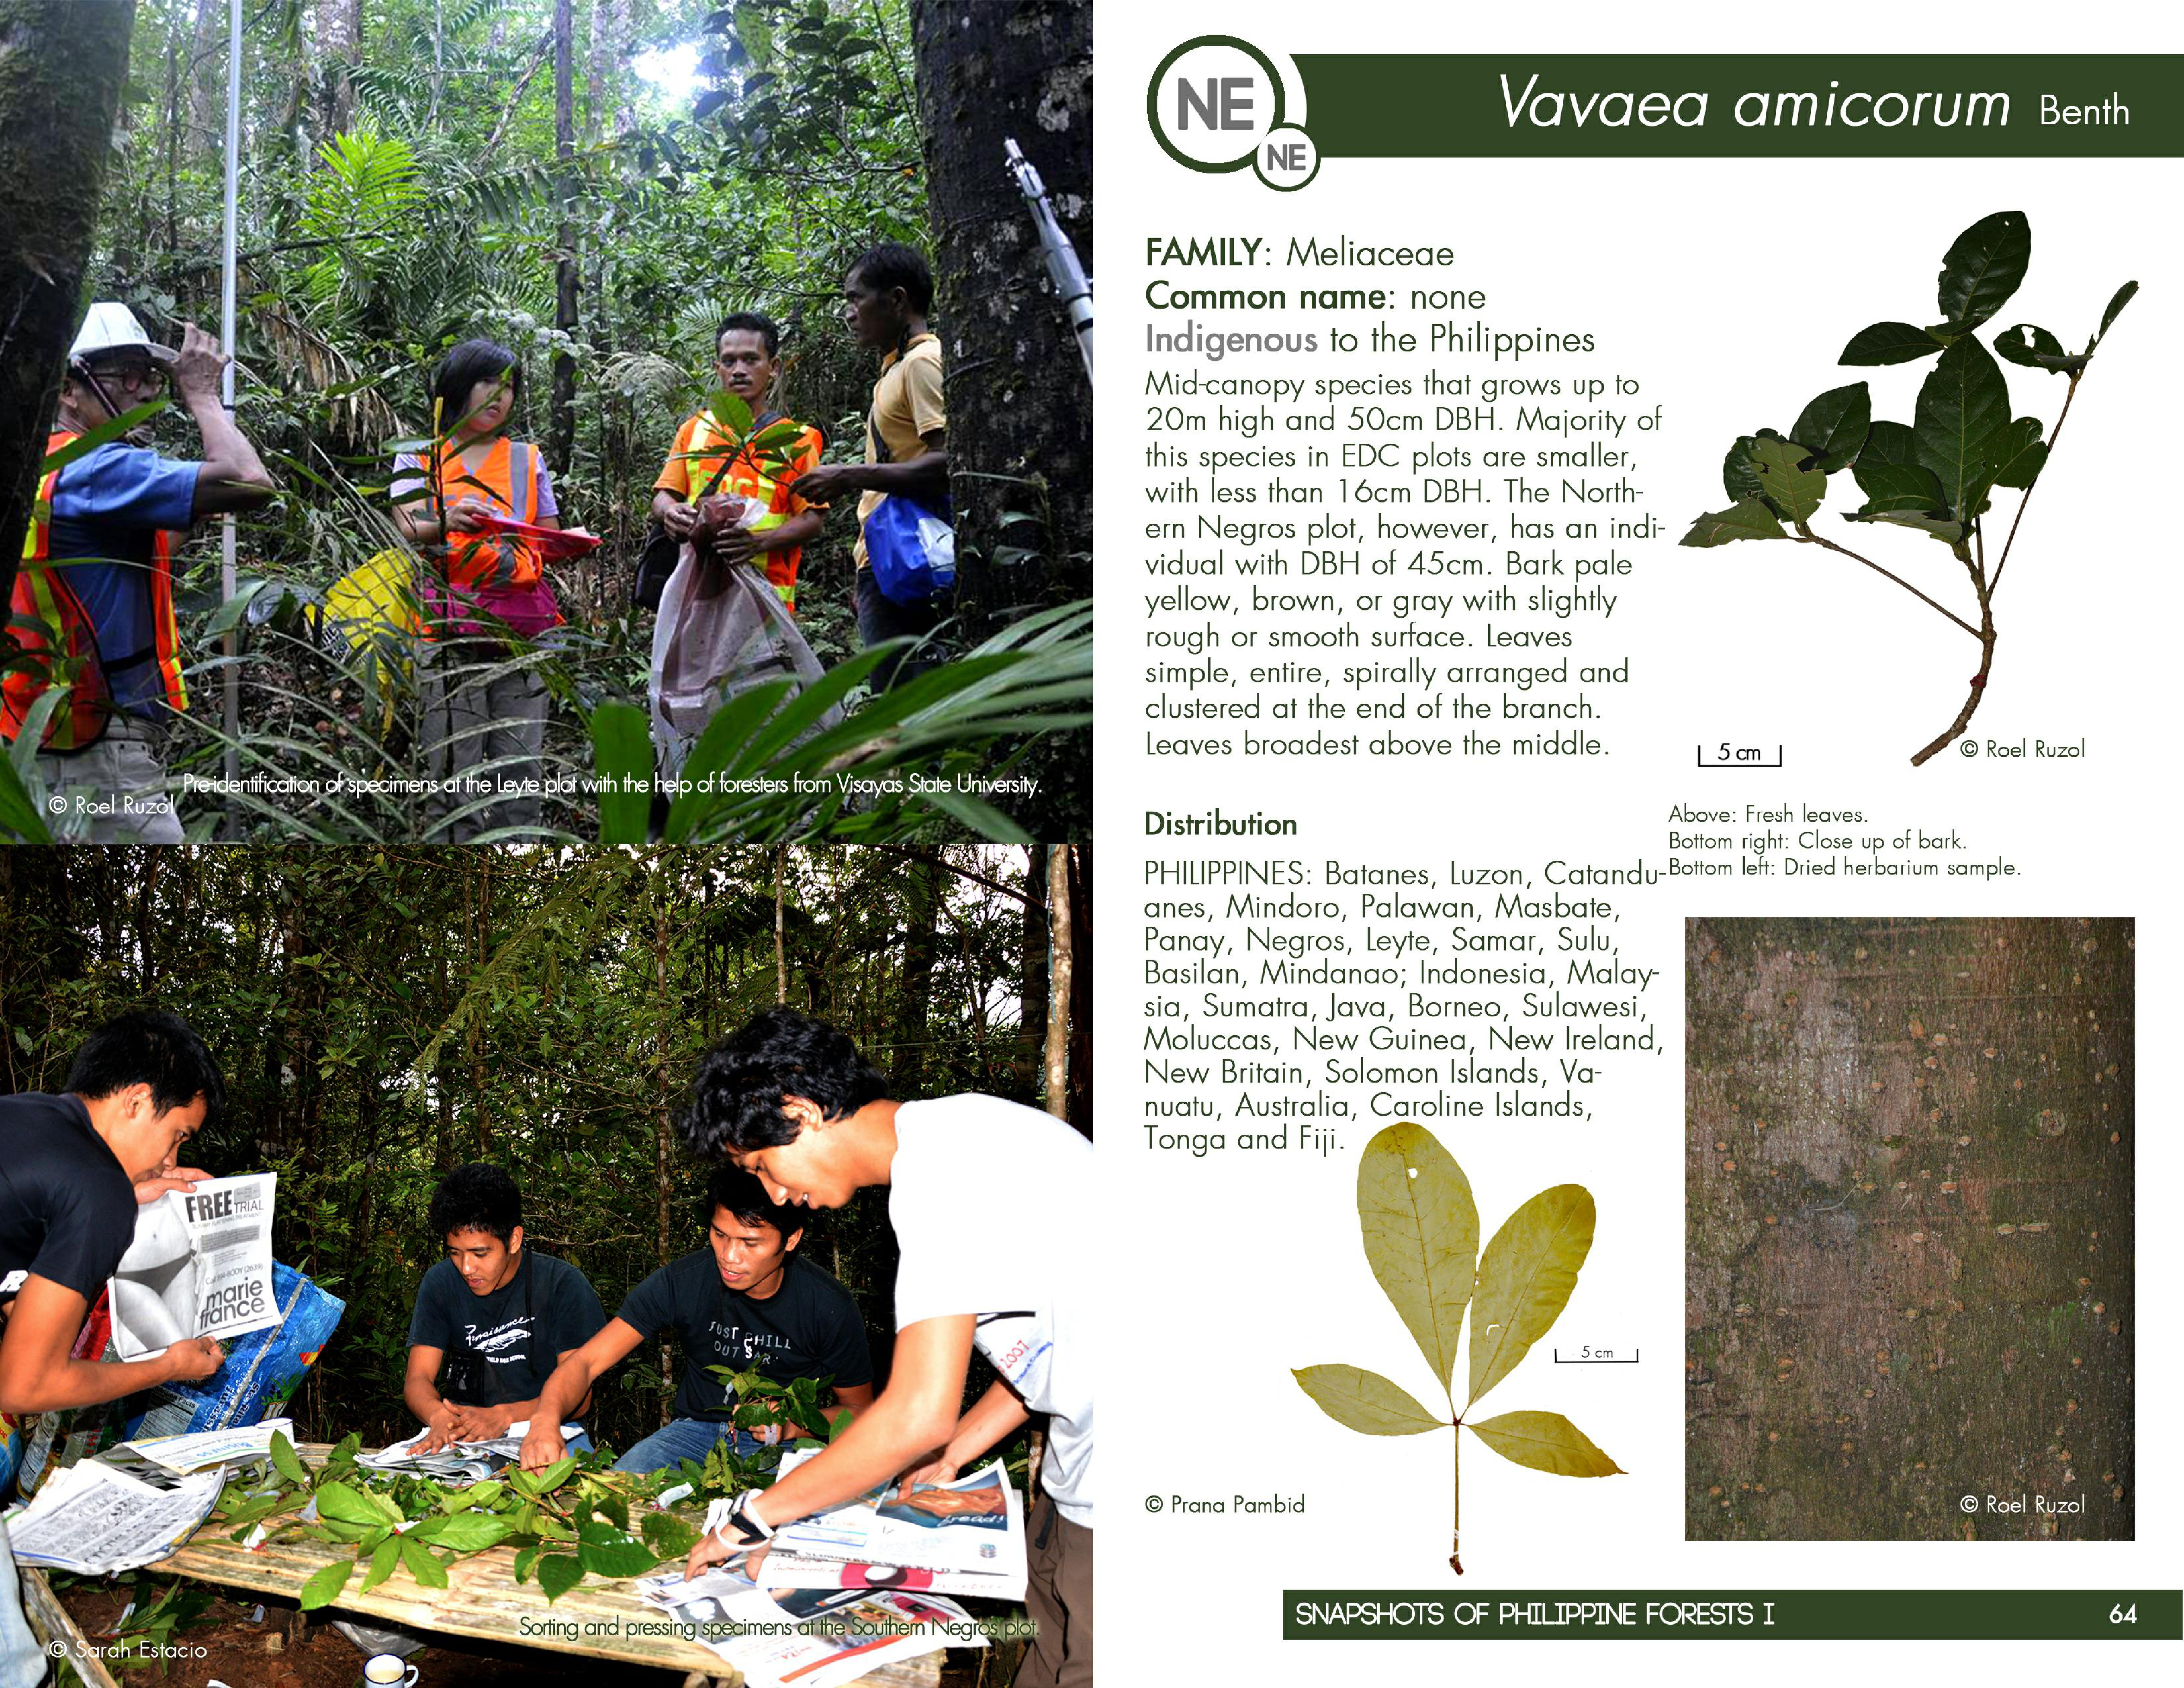 Copy of 2013 Snapshot of Philippine Forests - Trees in EDC Forest Dynamics Plot-08